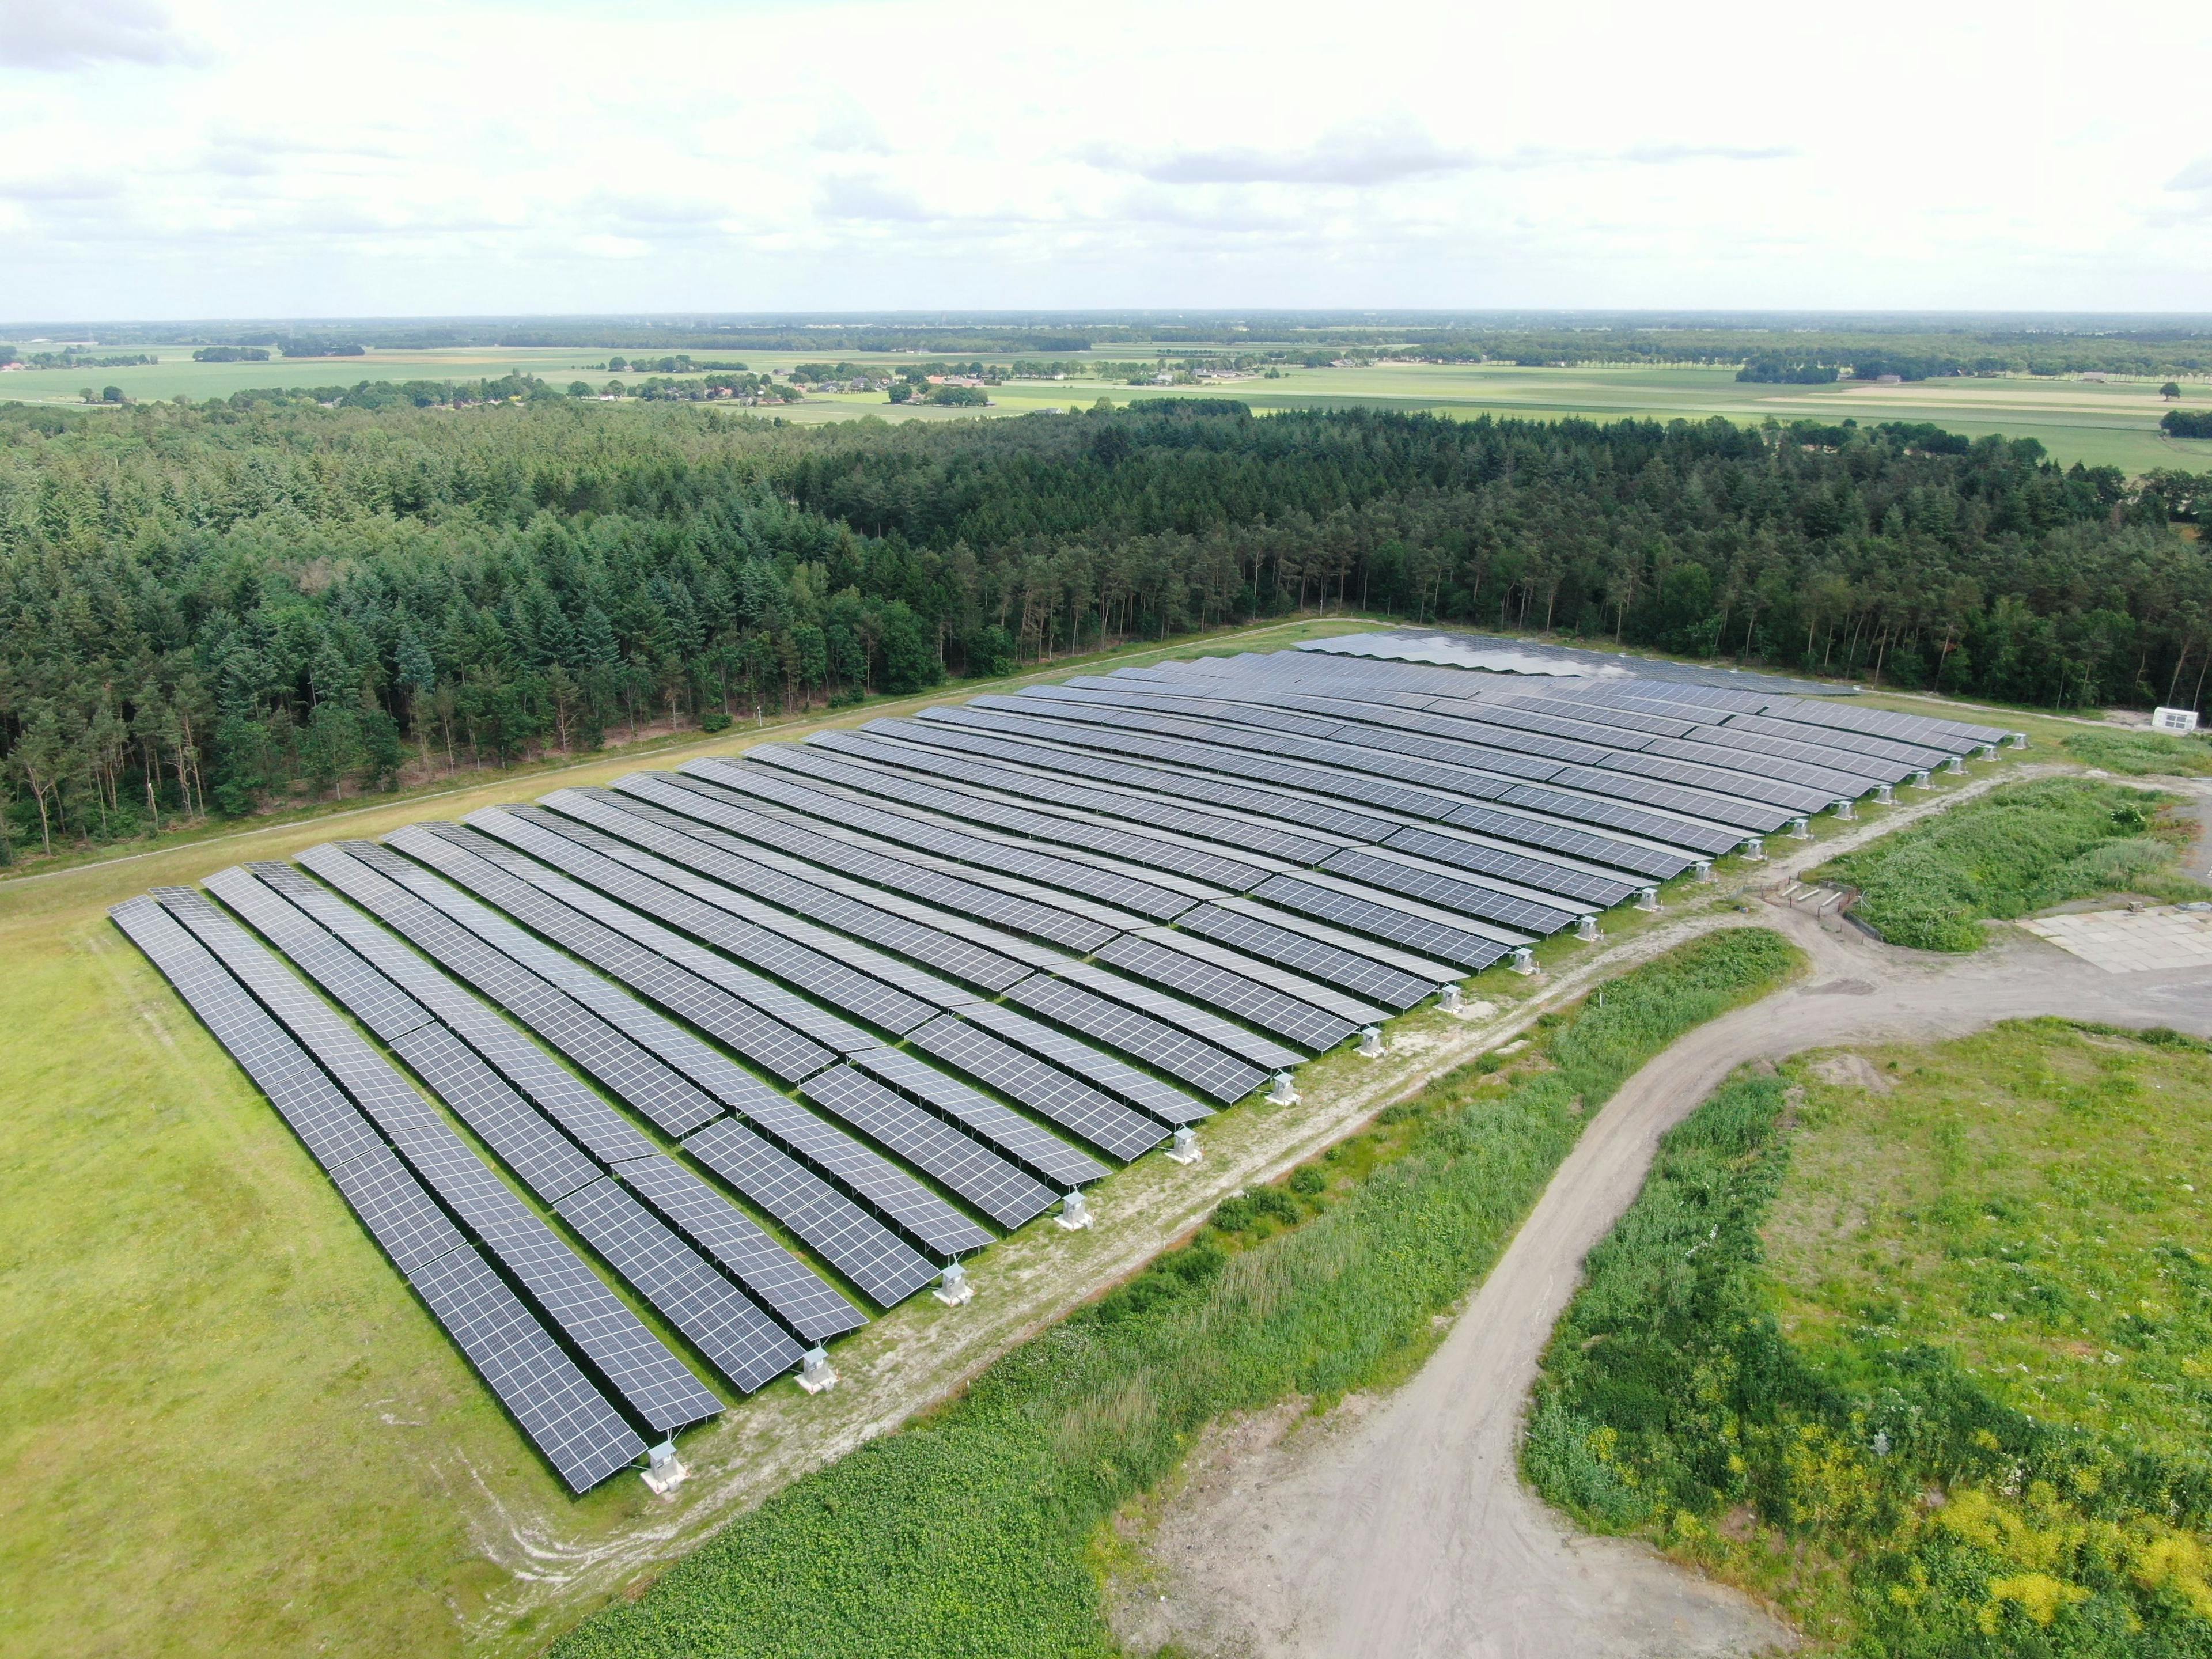 New investment into Czech solar power plants with a value of more than 100 million EUR